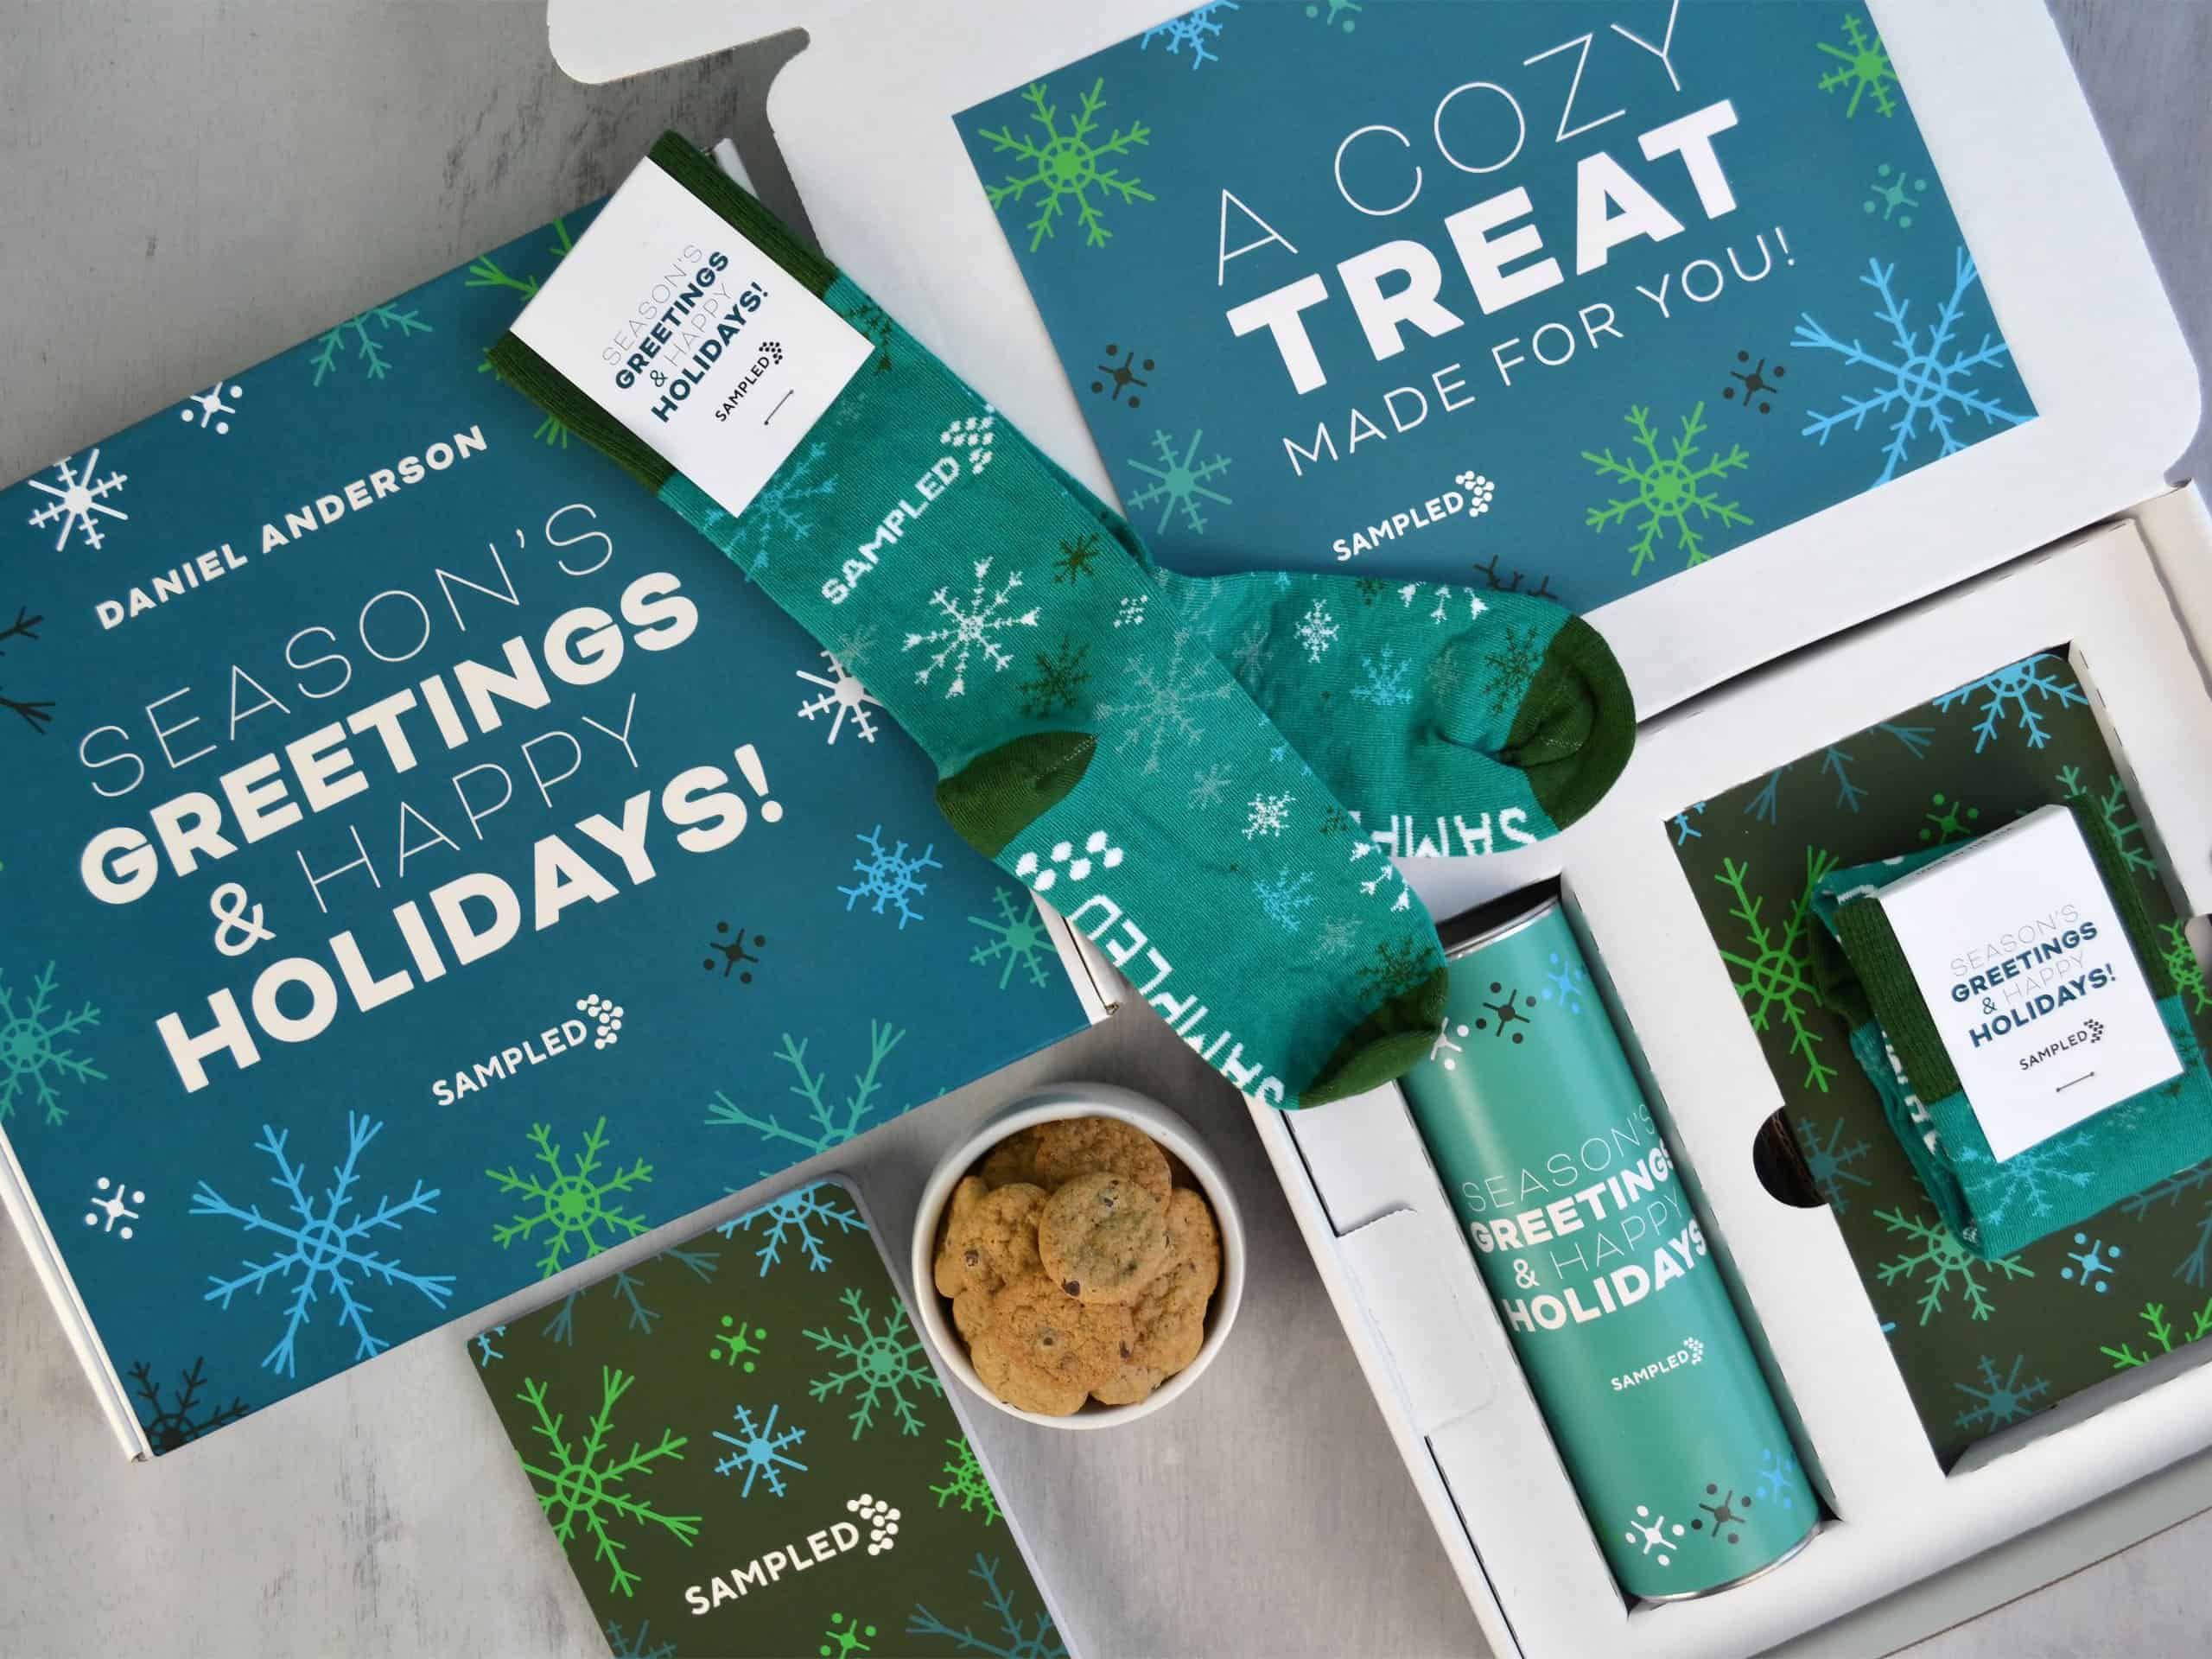 A fulfillment gift box with cookies and a gift card.